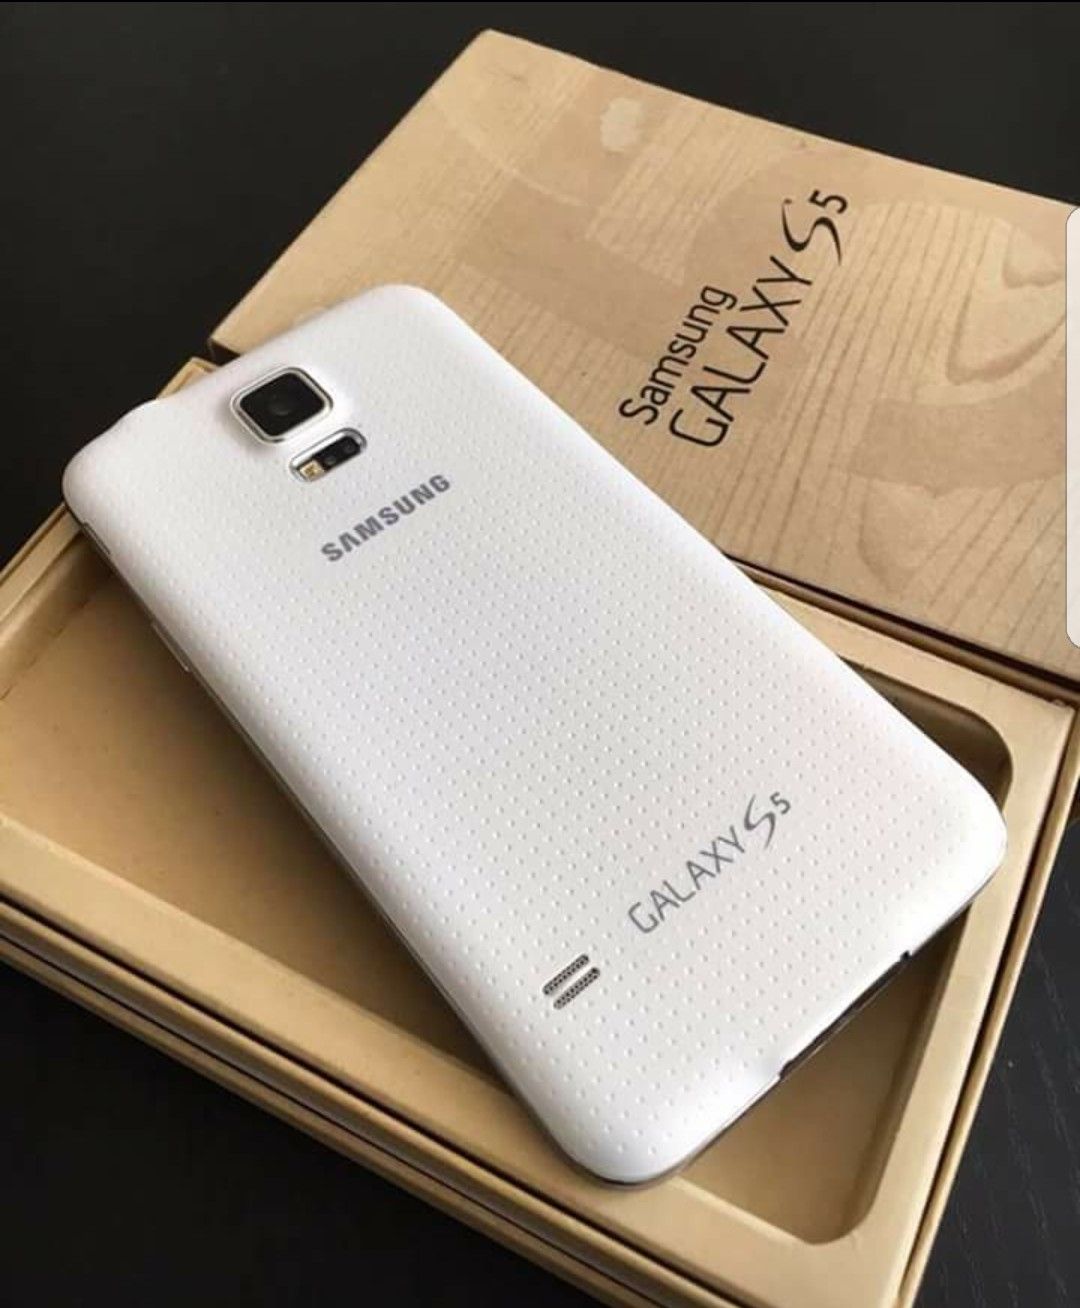 Samsung Galaxy S5. Factory Unlocked and Usable with Any Company Carrier SIM Any Country